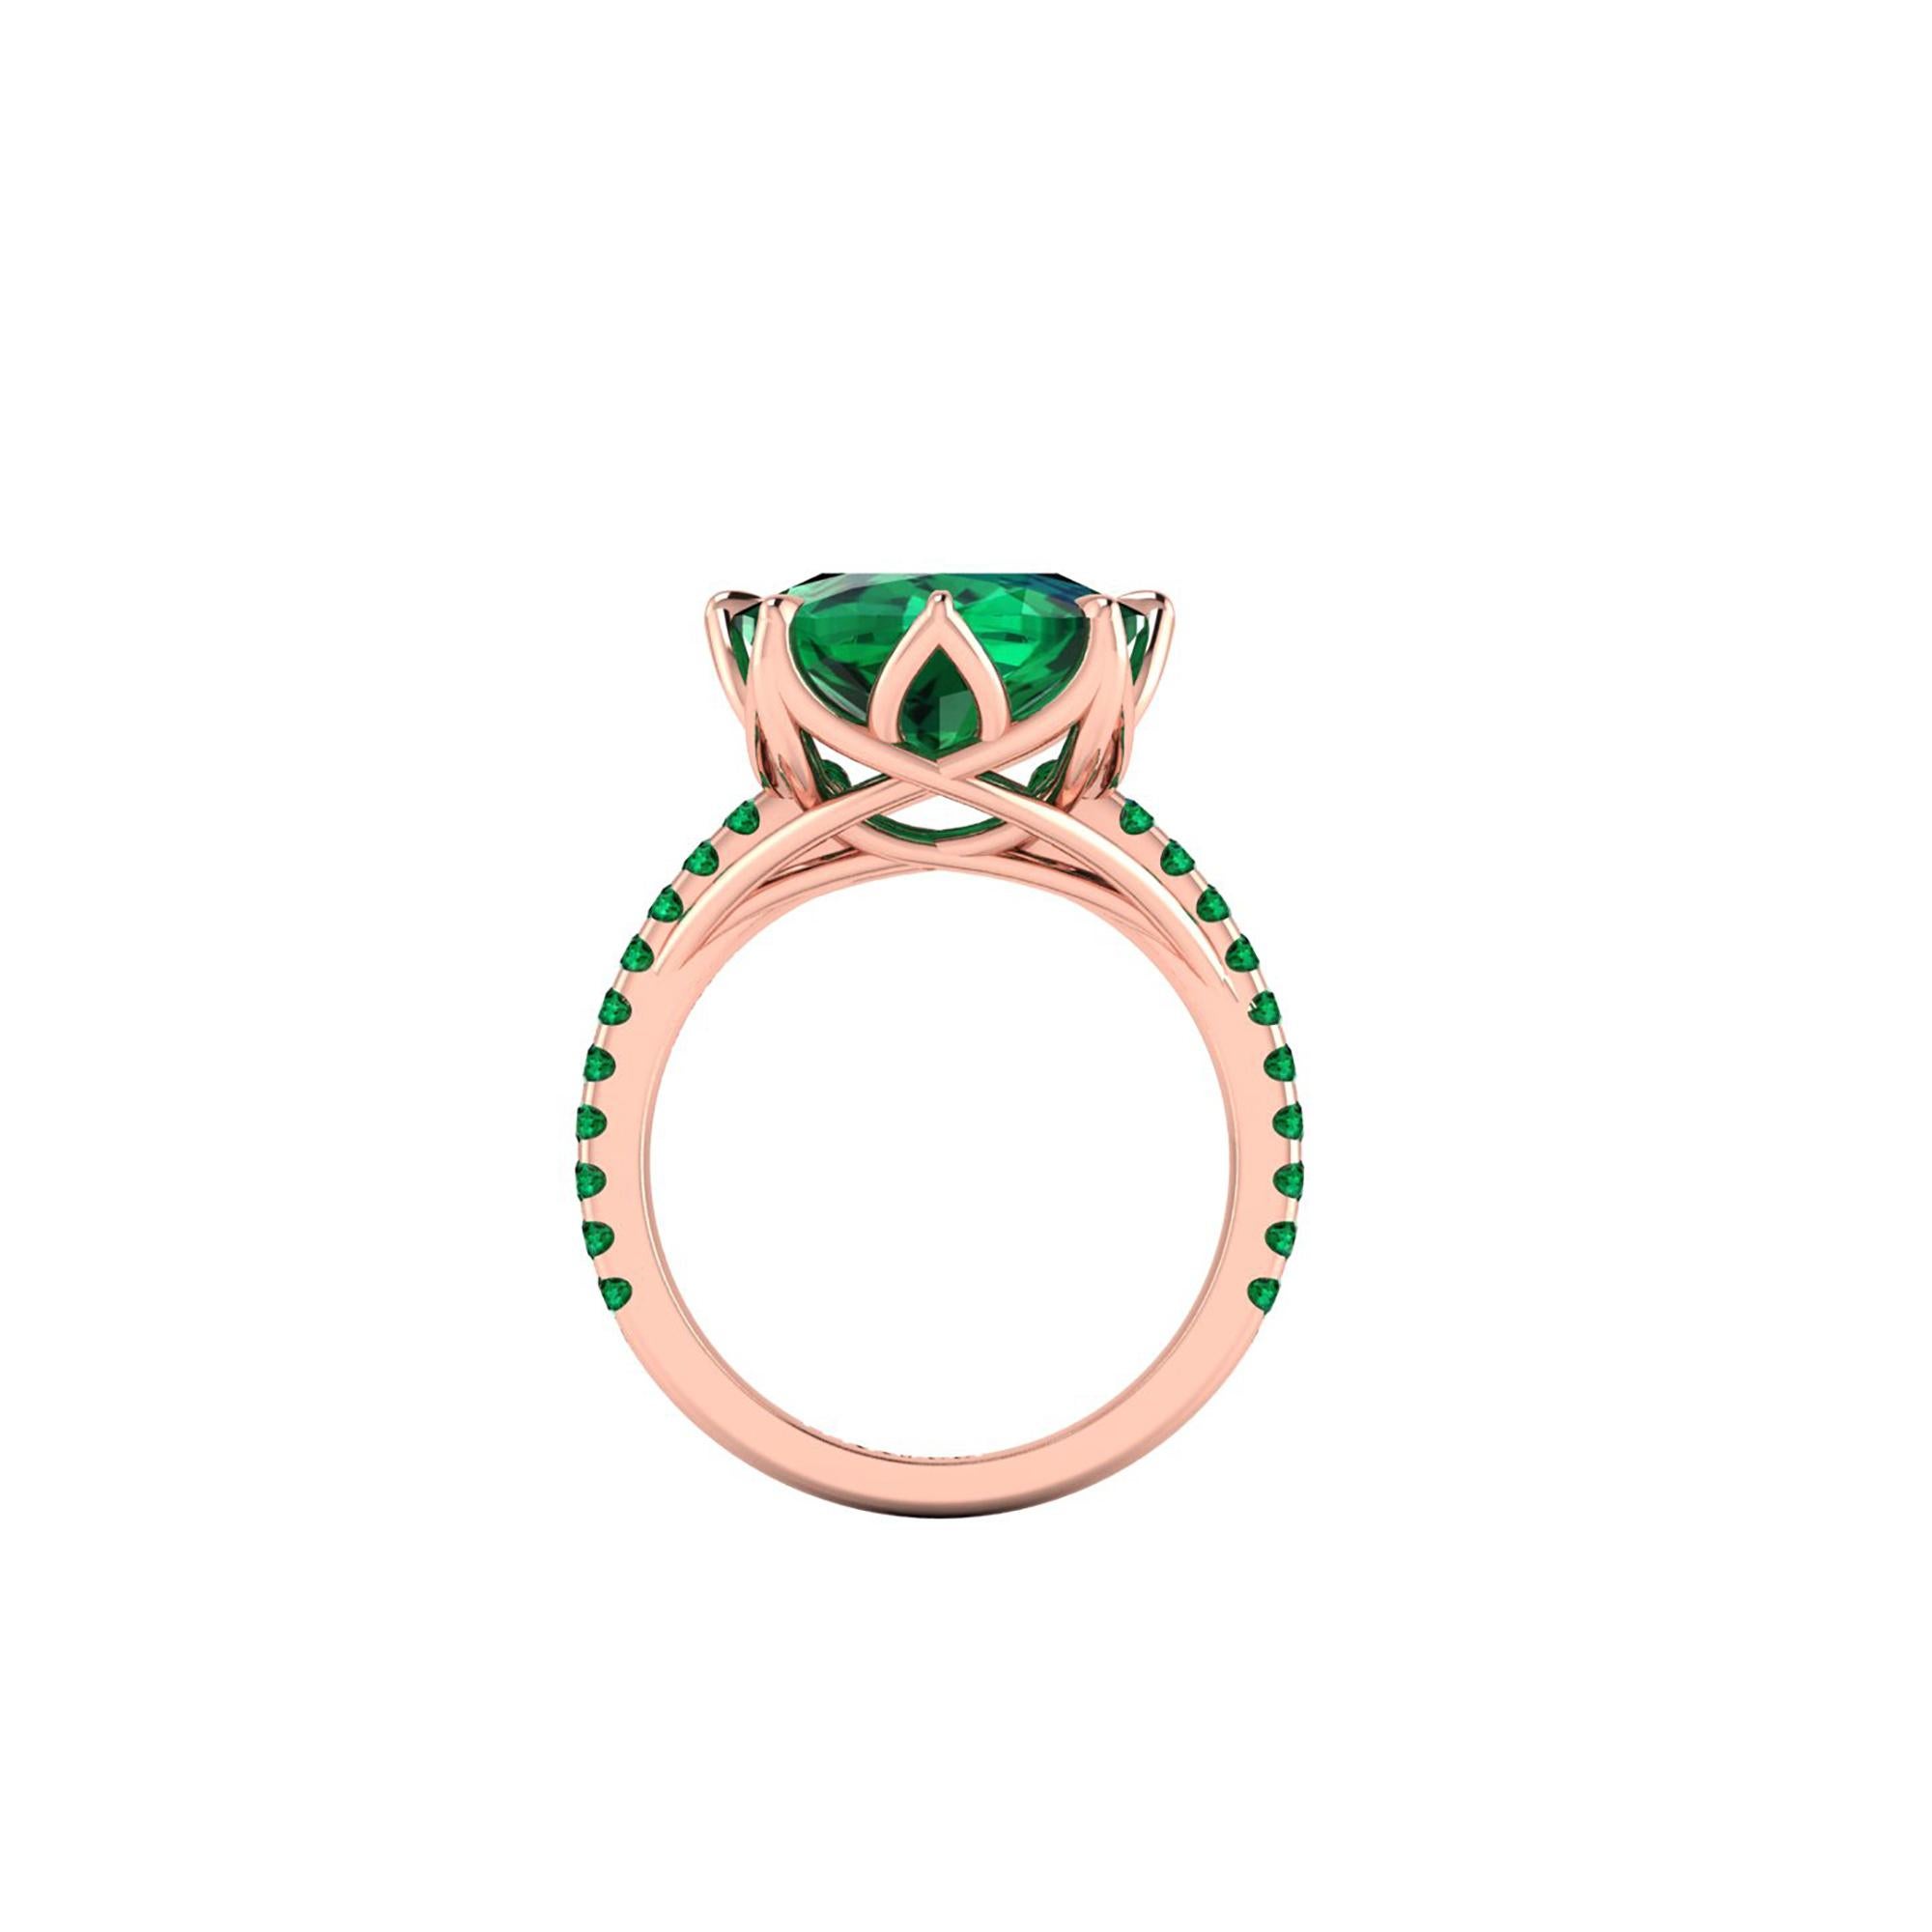 5 carat electric Green Tourmaline, with green Emerald pave' set on the shoulders of a one of a kind, hand made 18k rose gold ring, designed and conceived in New York City. A design that recall nature's vines and ever flowing life of exotic flowers,